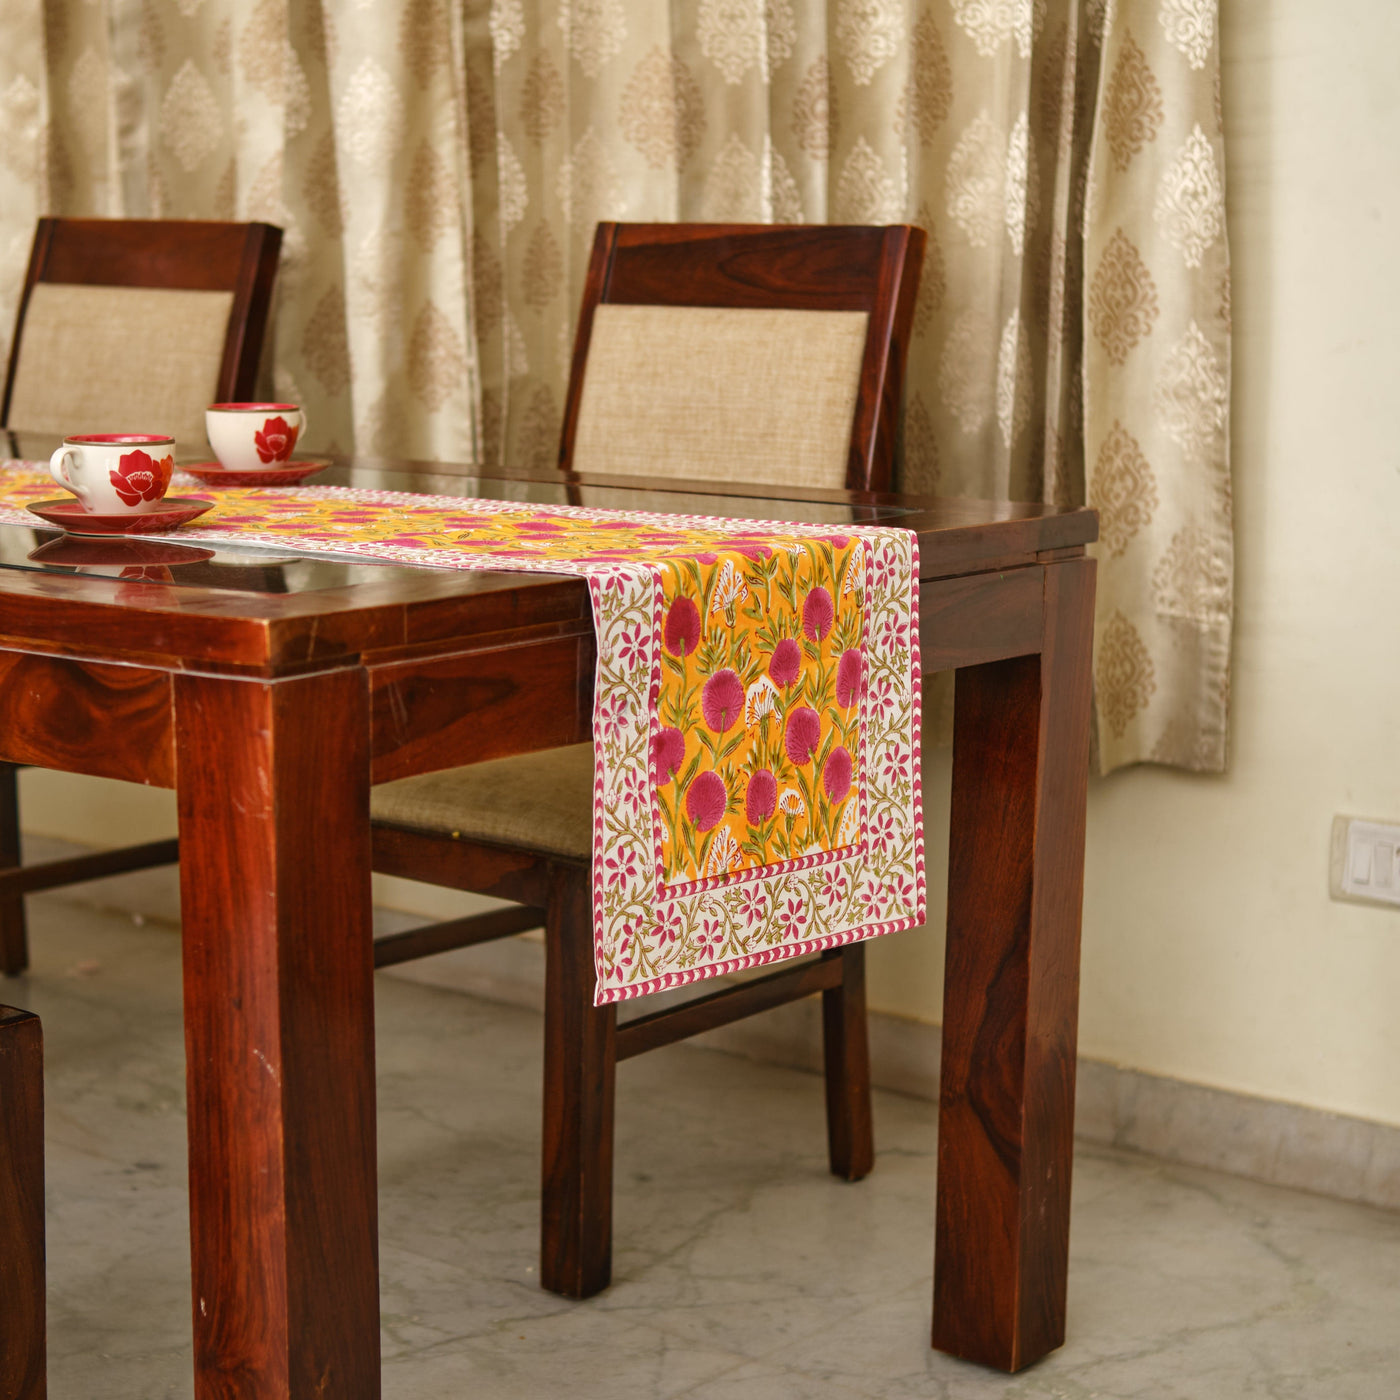 Cotton Print Club Table Runners Marigold Table Runner in 3 Sizes